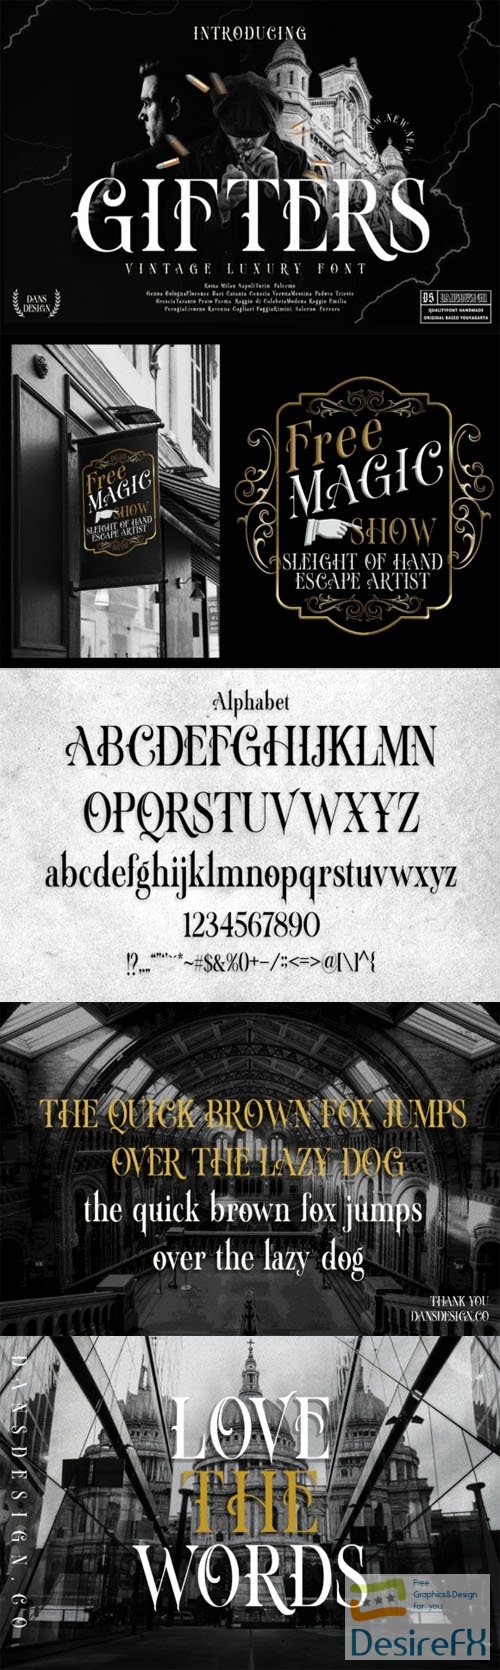 Gifters - Vintage Luxury Font